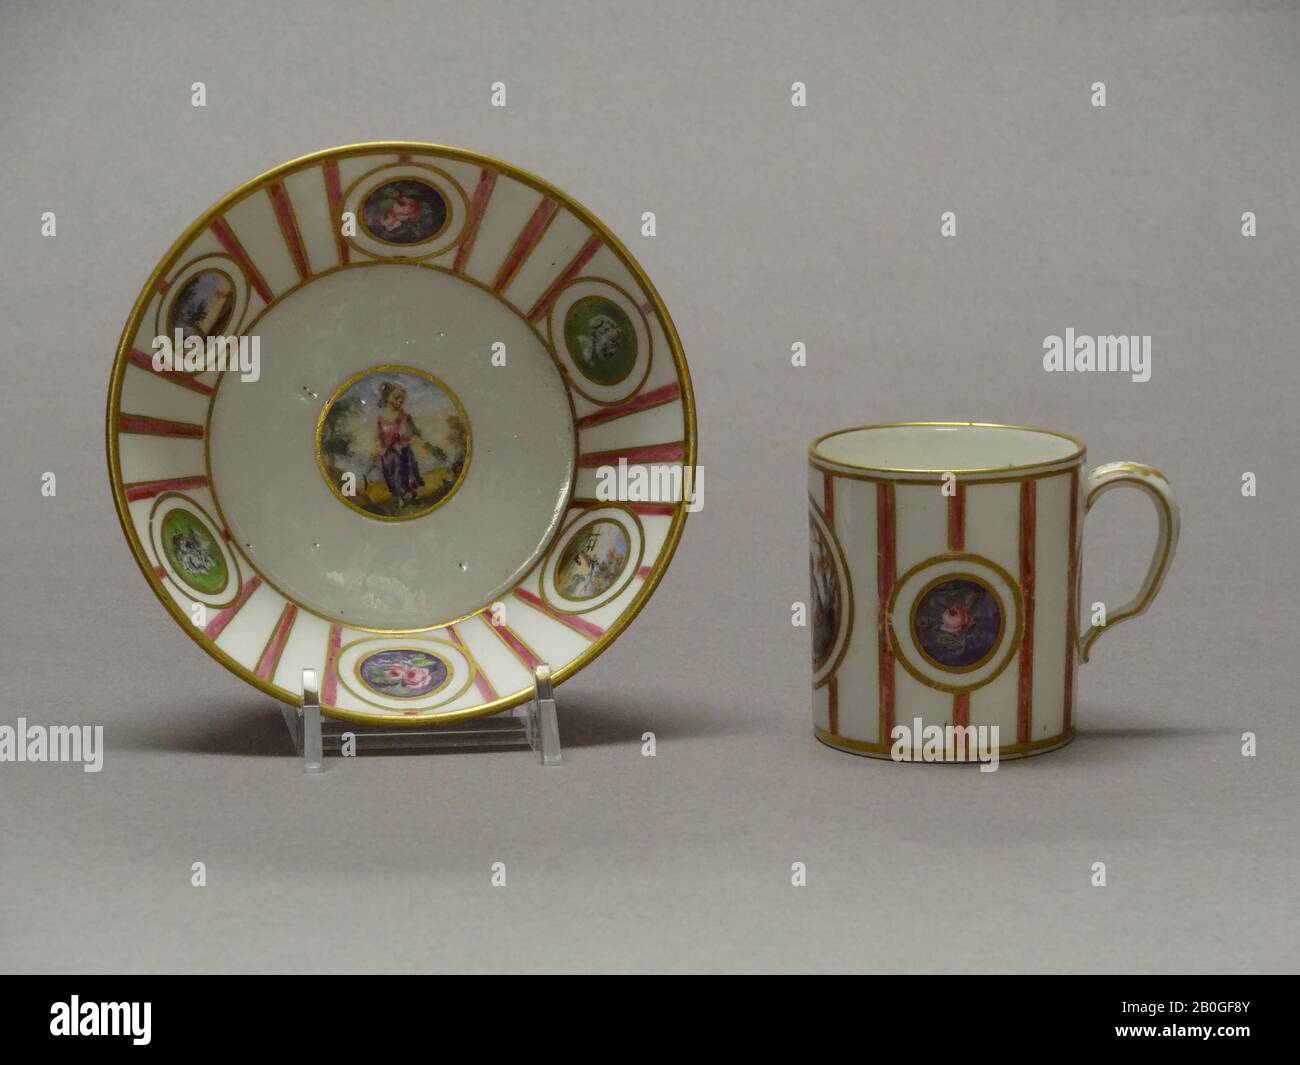 Sèvres Porcelain Manufactory, French, 1756–present, Jean Bouchet, (French, active 1757–1793), Cup and Saucer, 1785, Soft-paste porcelain, cup: 2 1/8 x 2 5/16 in. (5.4 x 5.9 cm Stock Photo